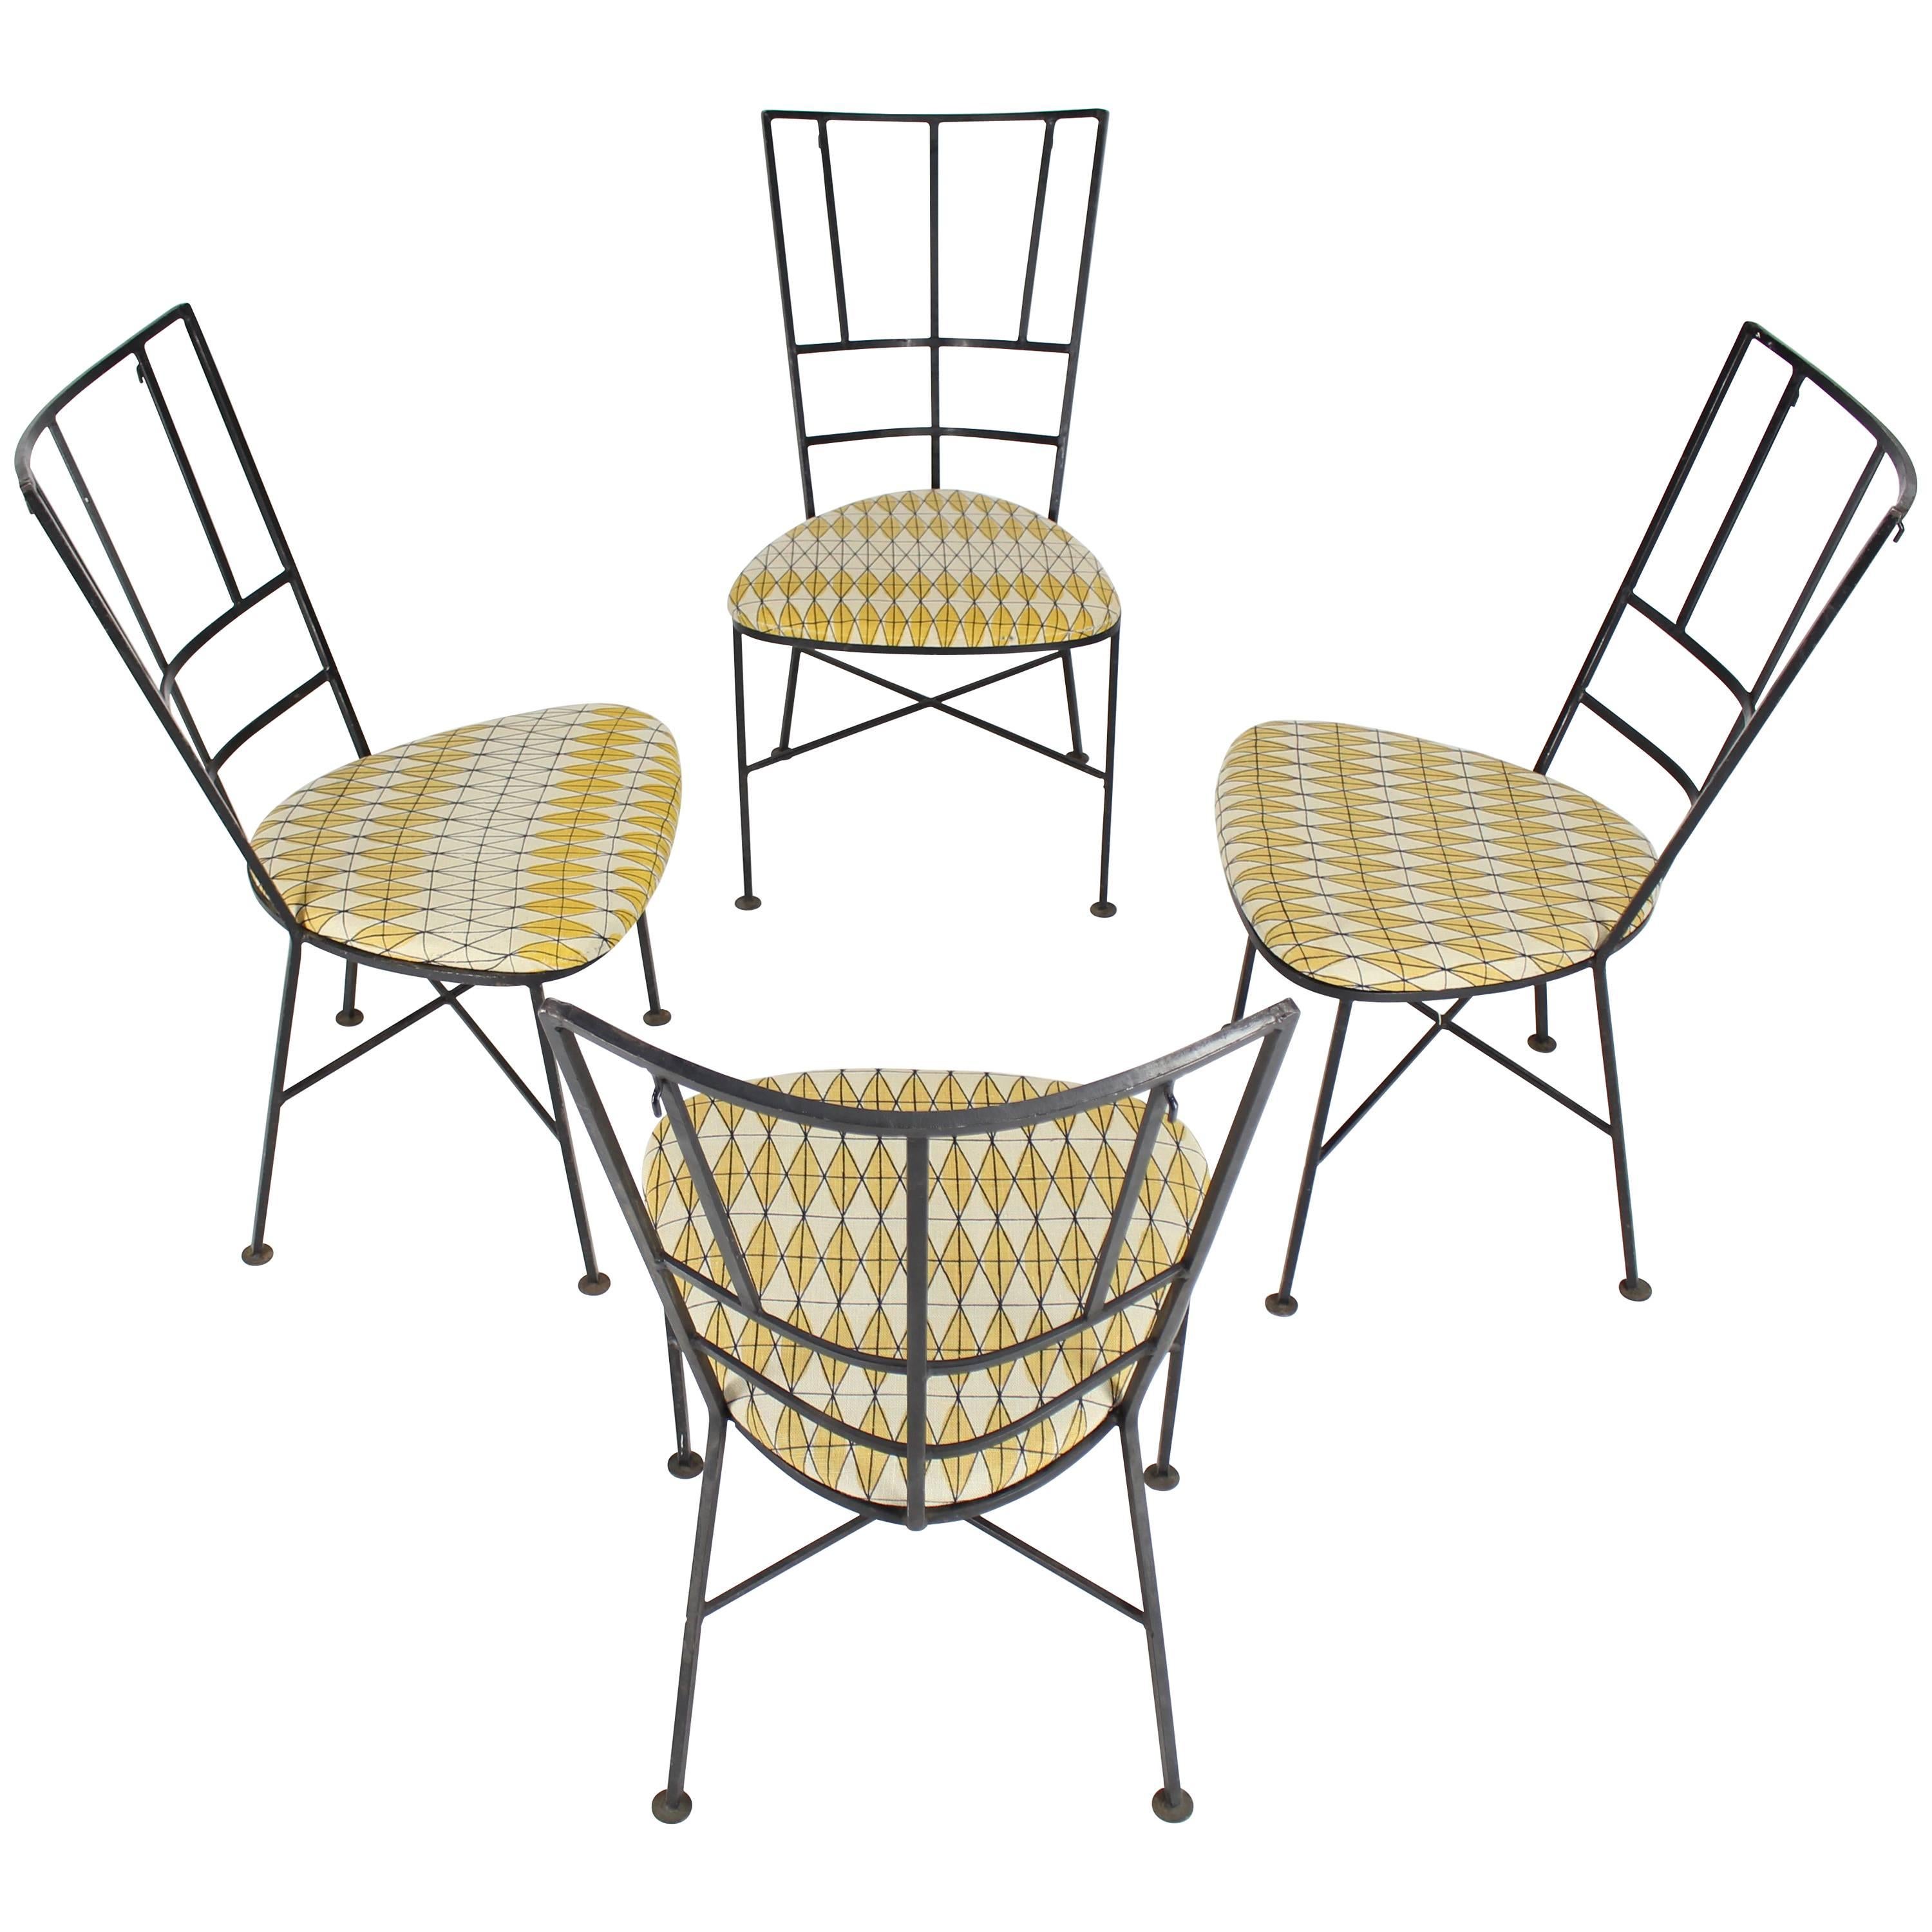 Set of Four Wrought Iron Outdoor Chairs Heart Shape Seats